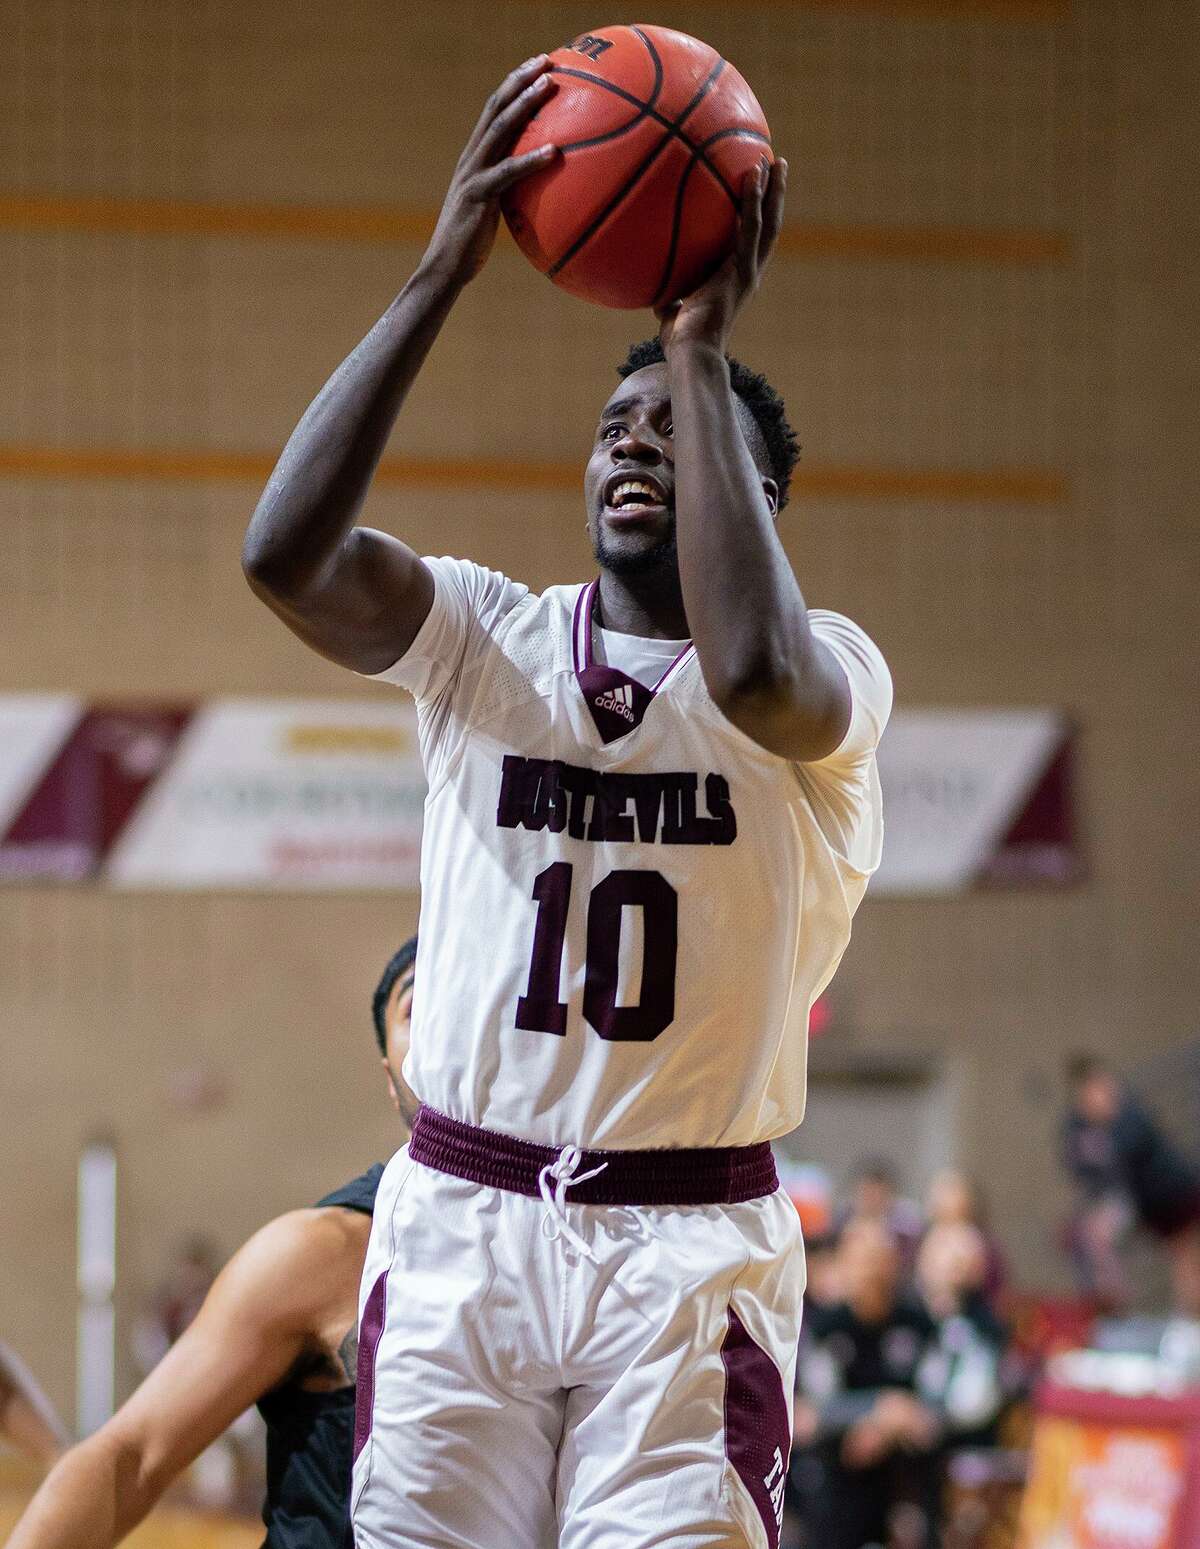 Jermaine Drewey goes up to shoot in a game against Southwestern Adventist University, Monday, Nov. 15, 2021 at the TAMIU KCB.